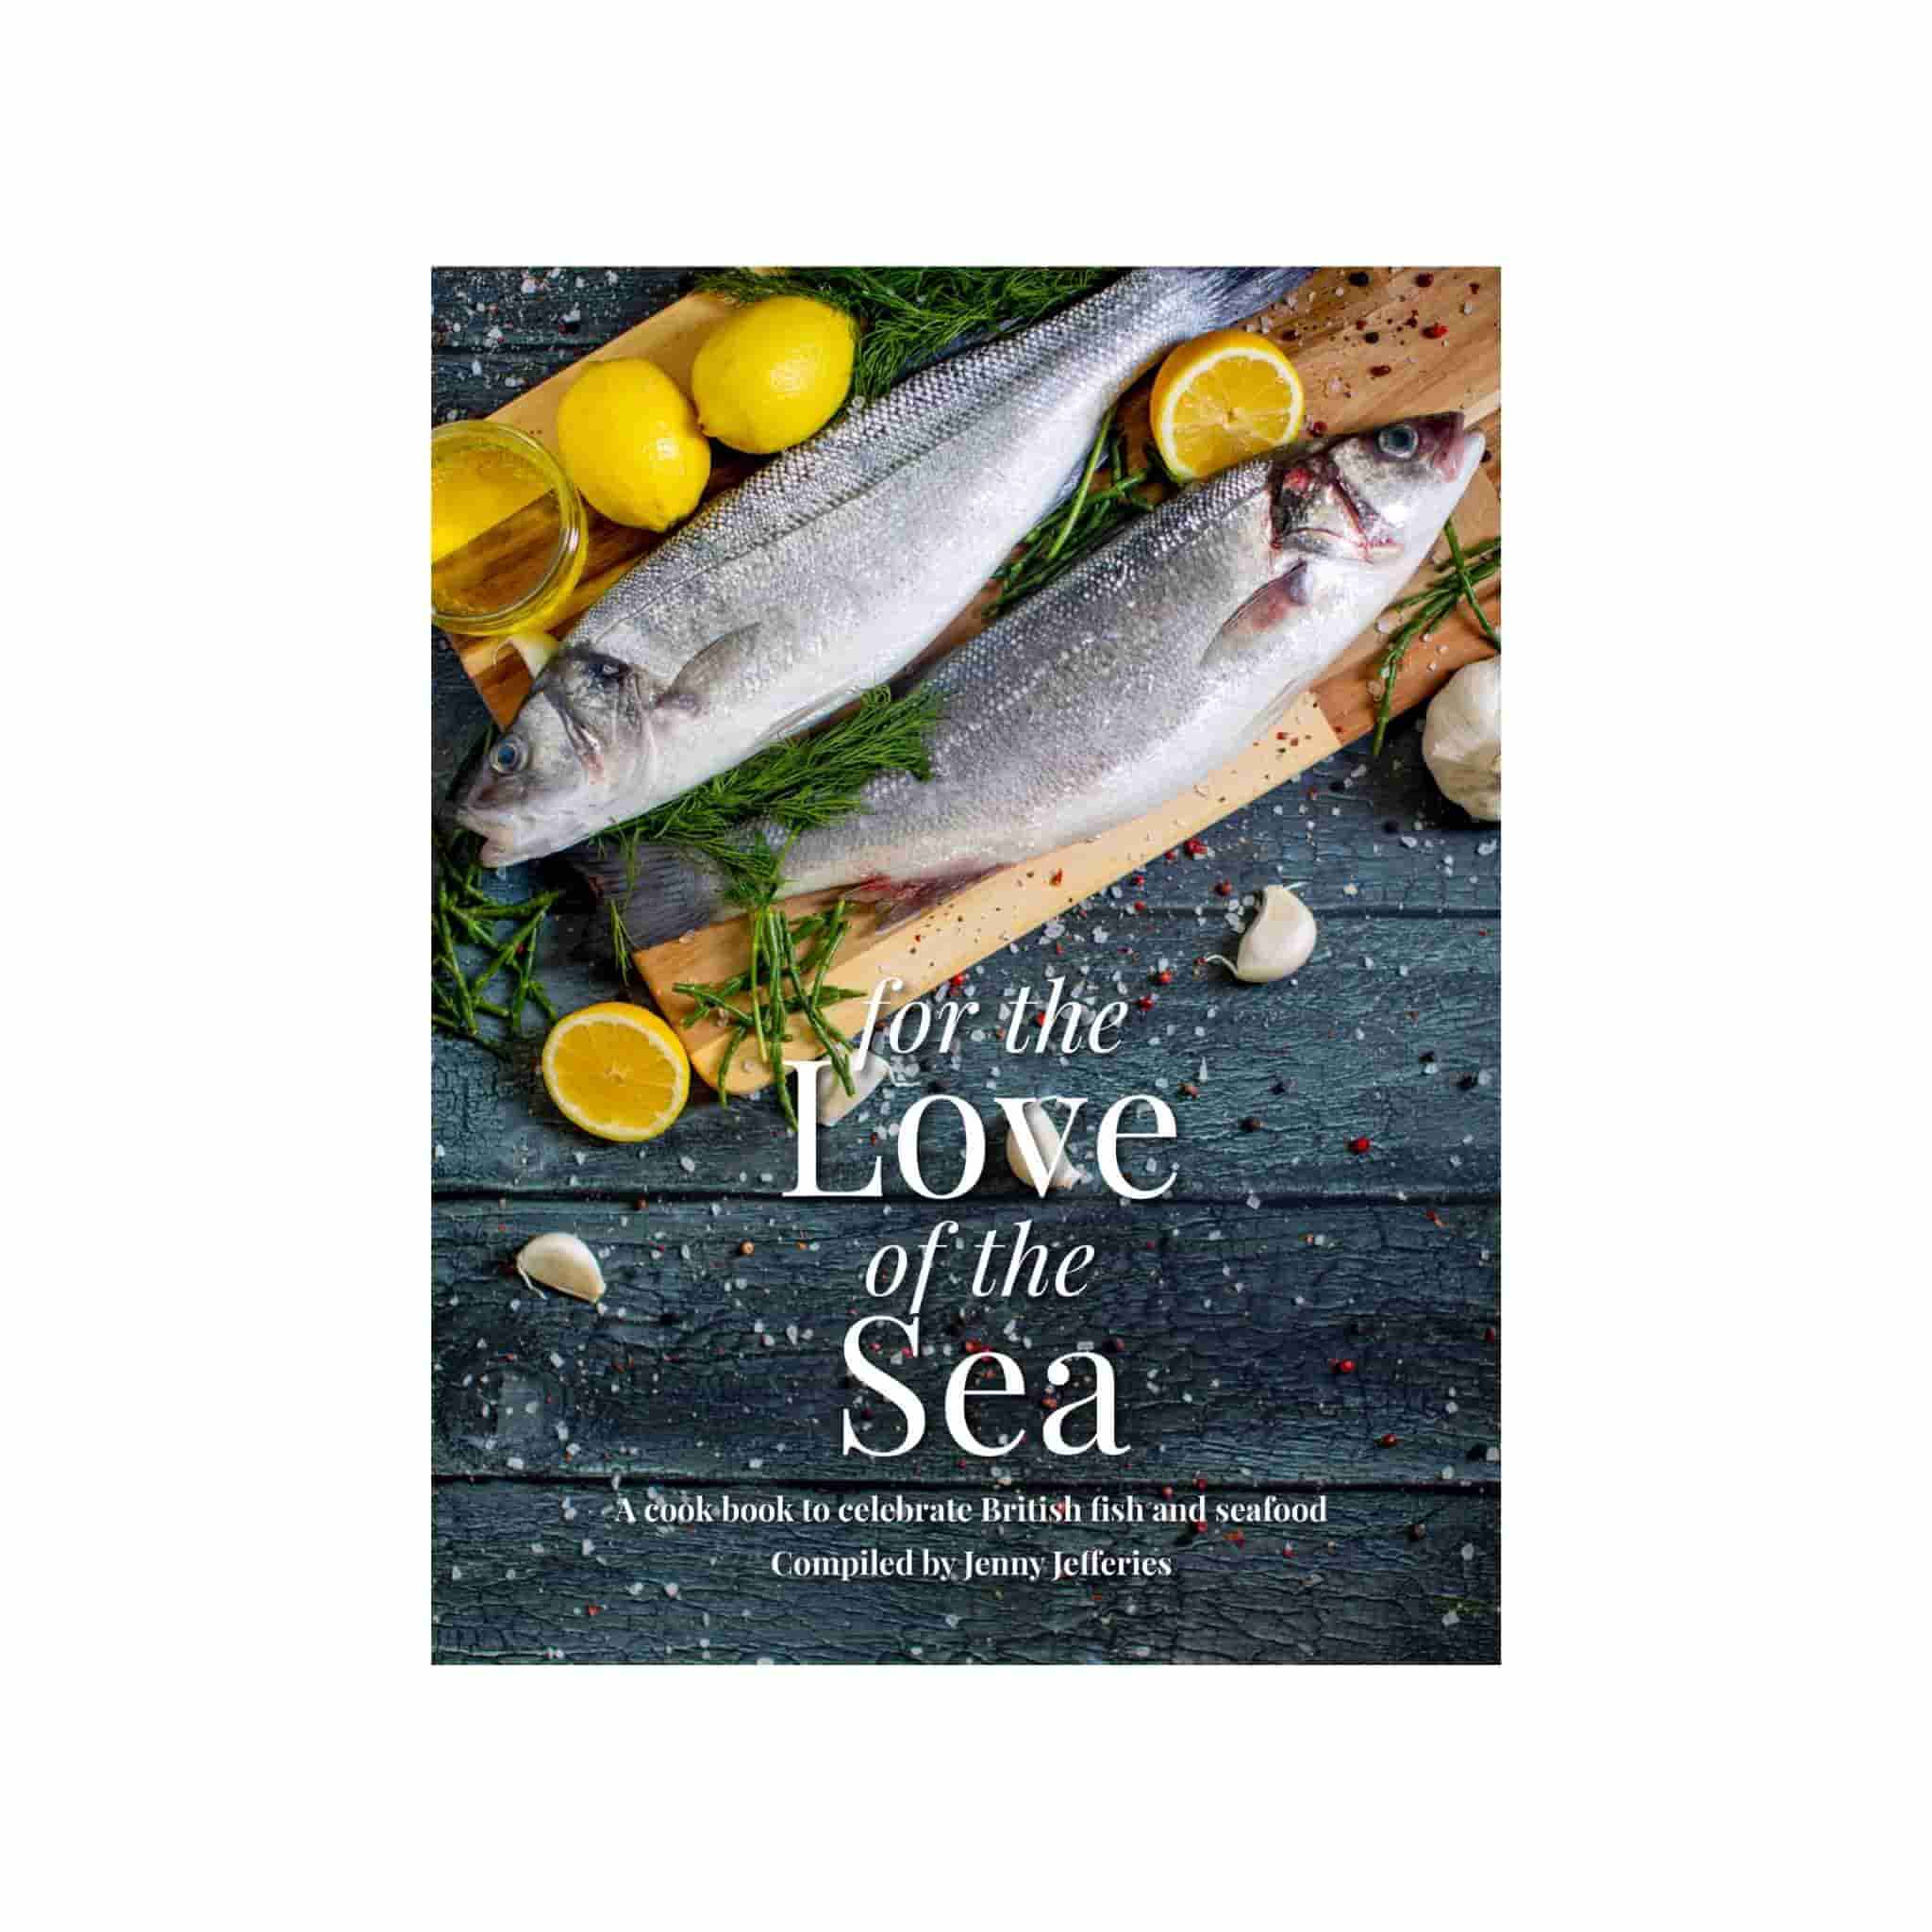 For the Love of the Sea cook book